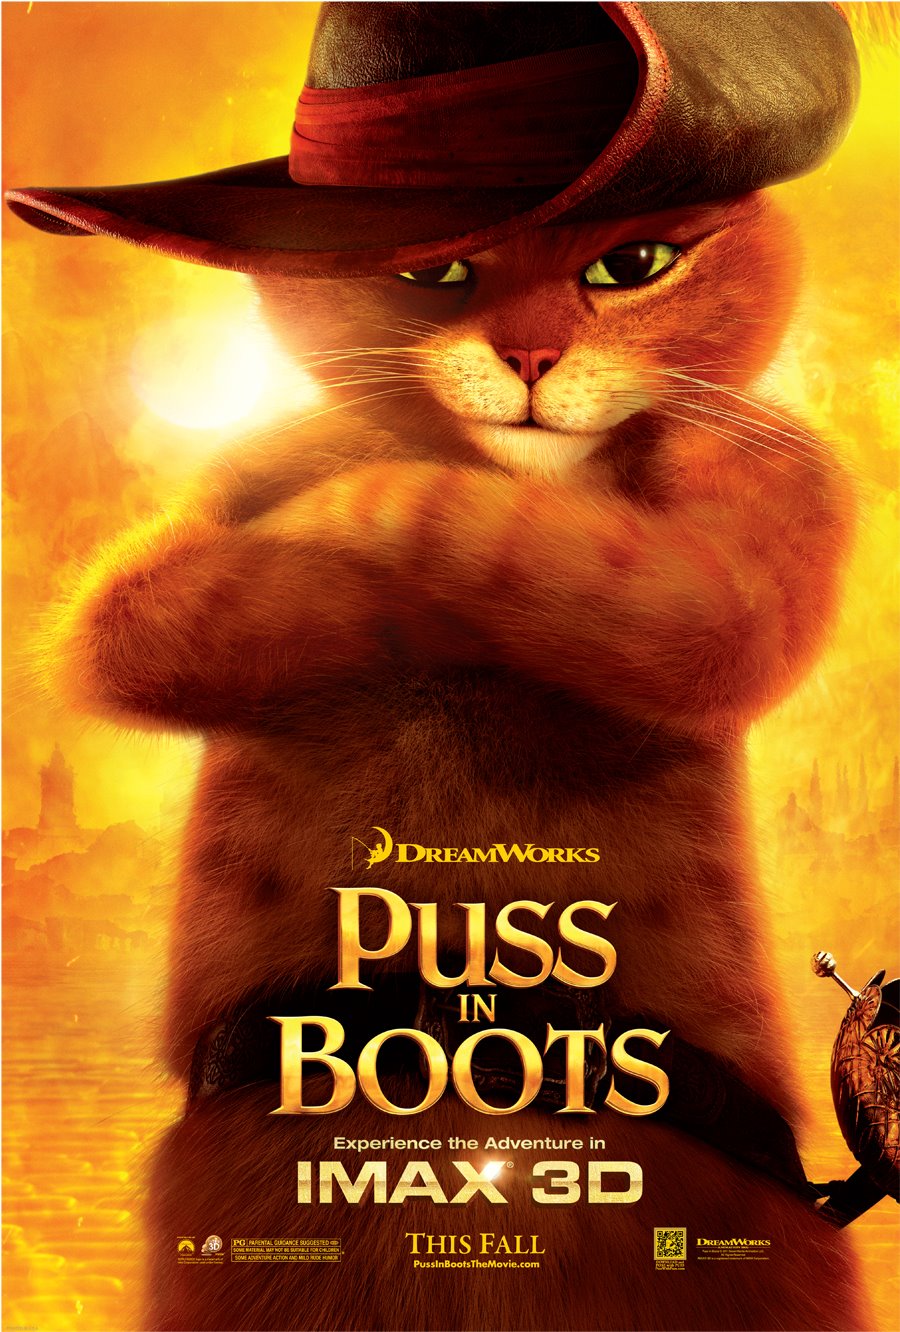 Puss-in-Boots-Poster-9.jpg